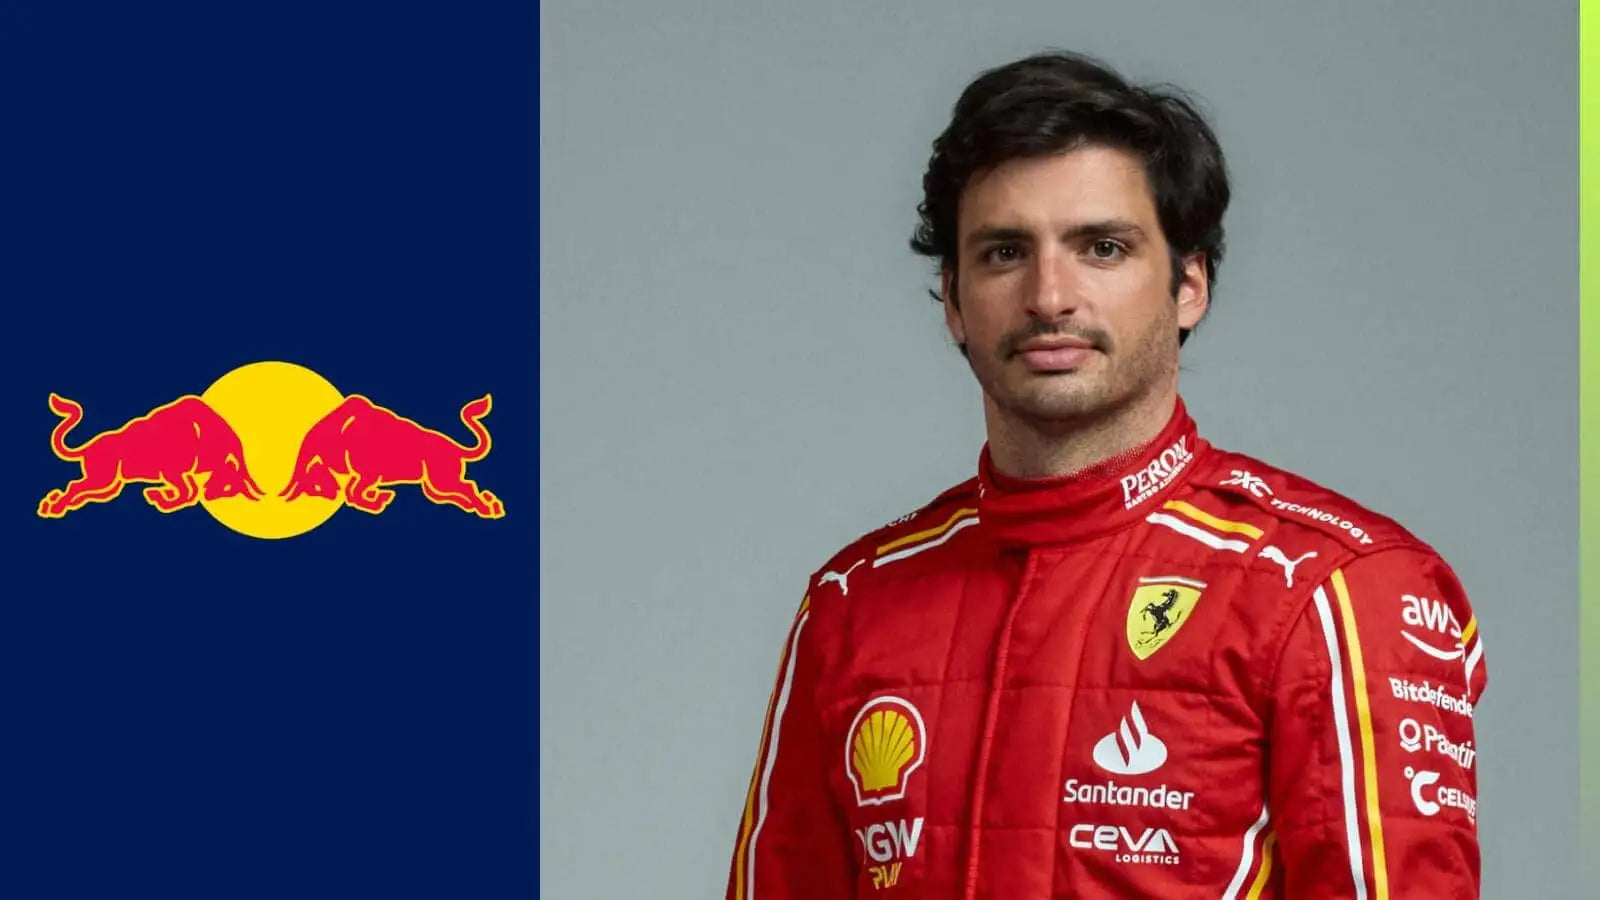 Helmut Marko addresses Carlos Sainz rumours with key Red Bull contender ruled out